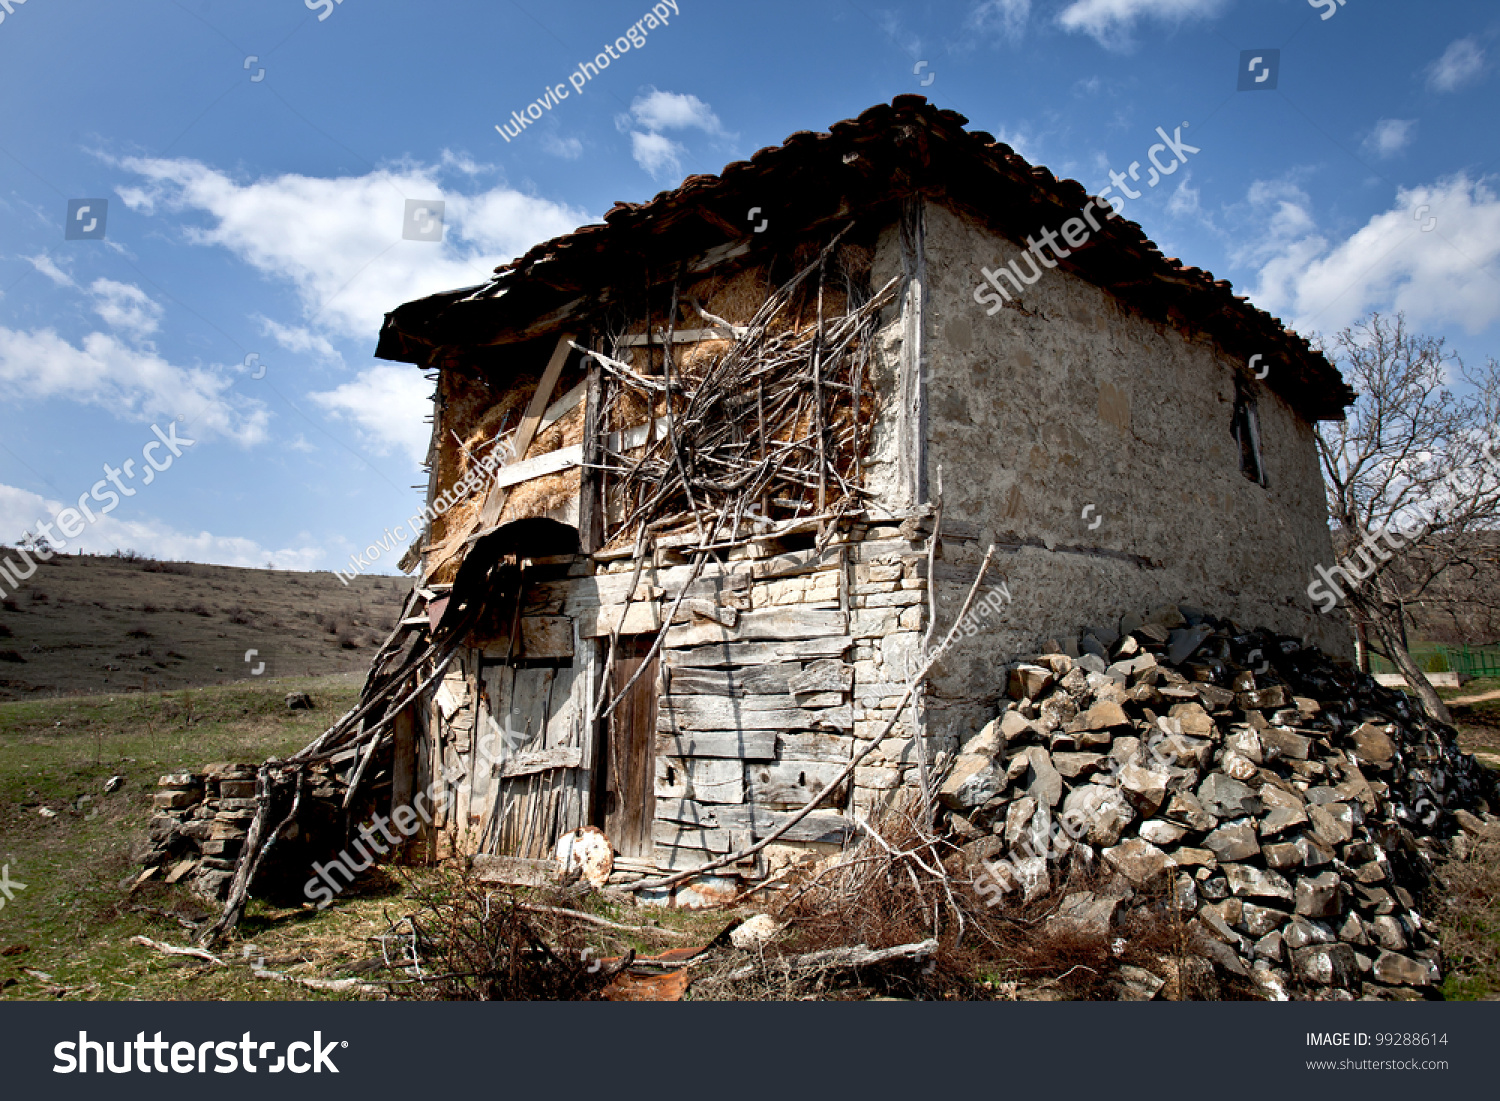 Old Village House In Macedonia Stock Photo 99288614 : Shutterstock